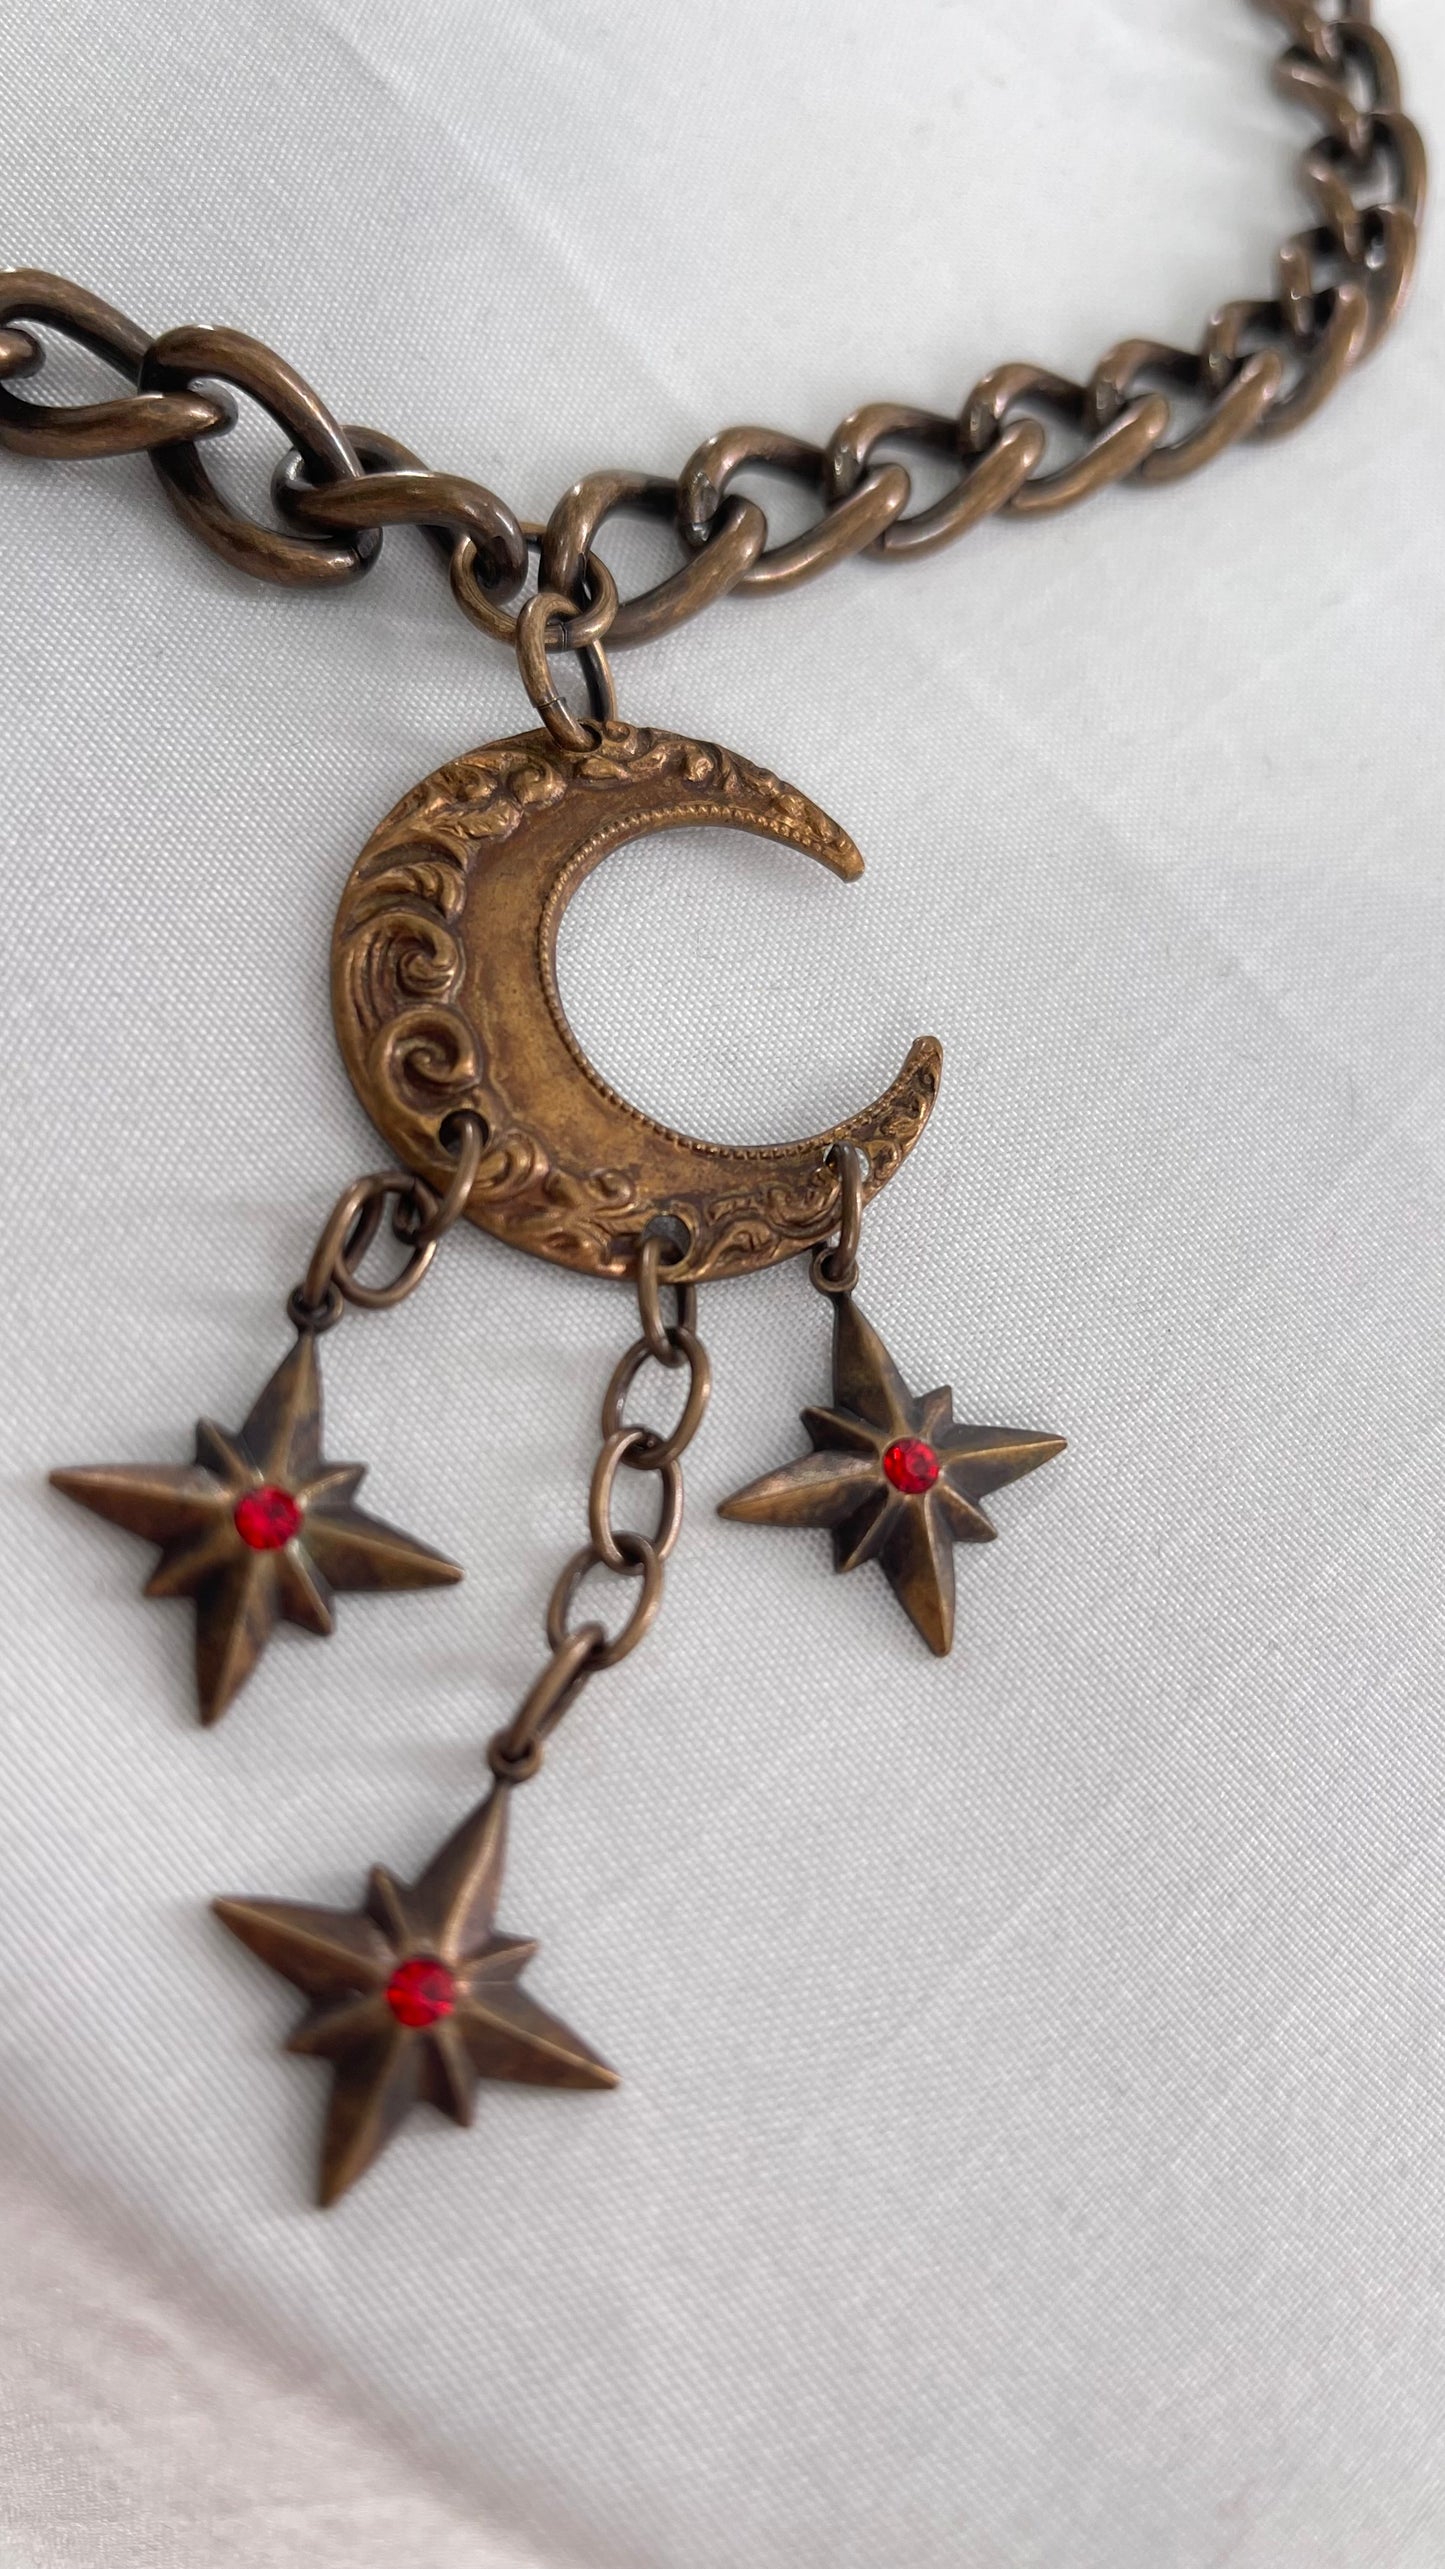 Scarlet Moon Heavy Chain Necklace